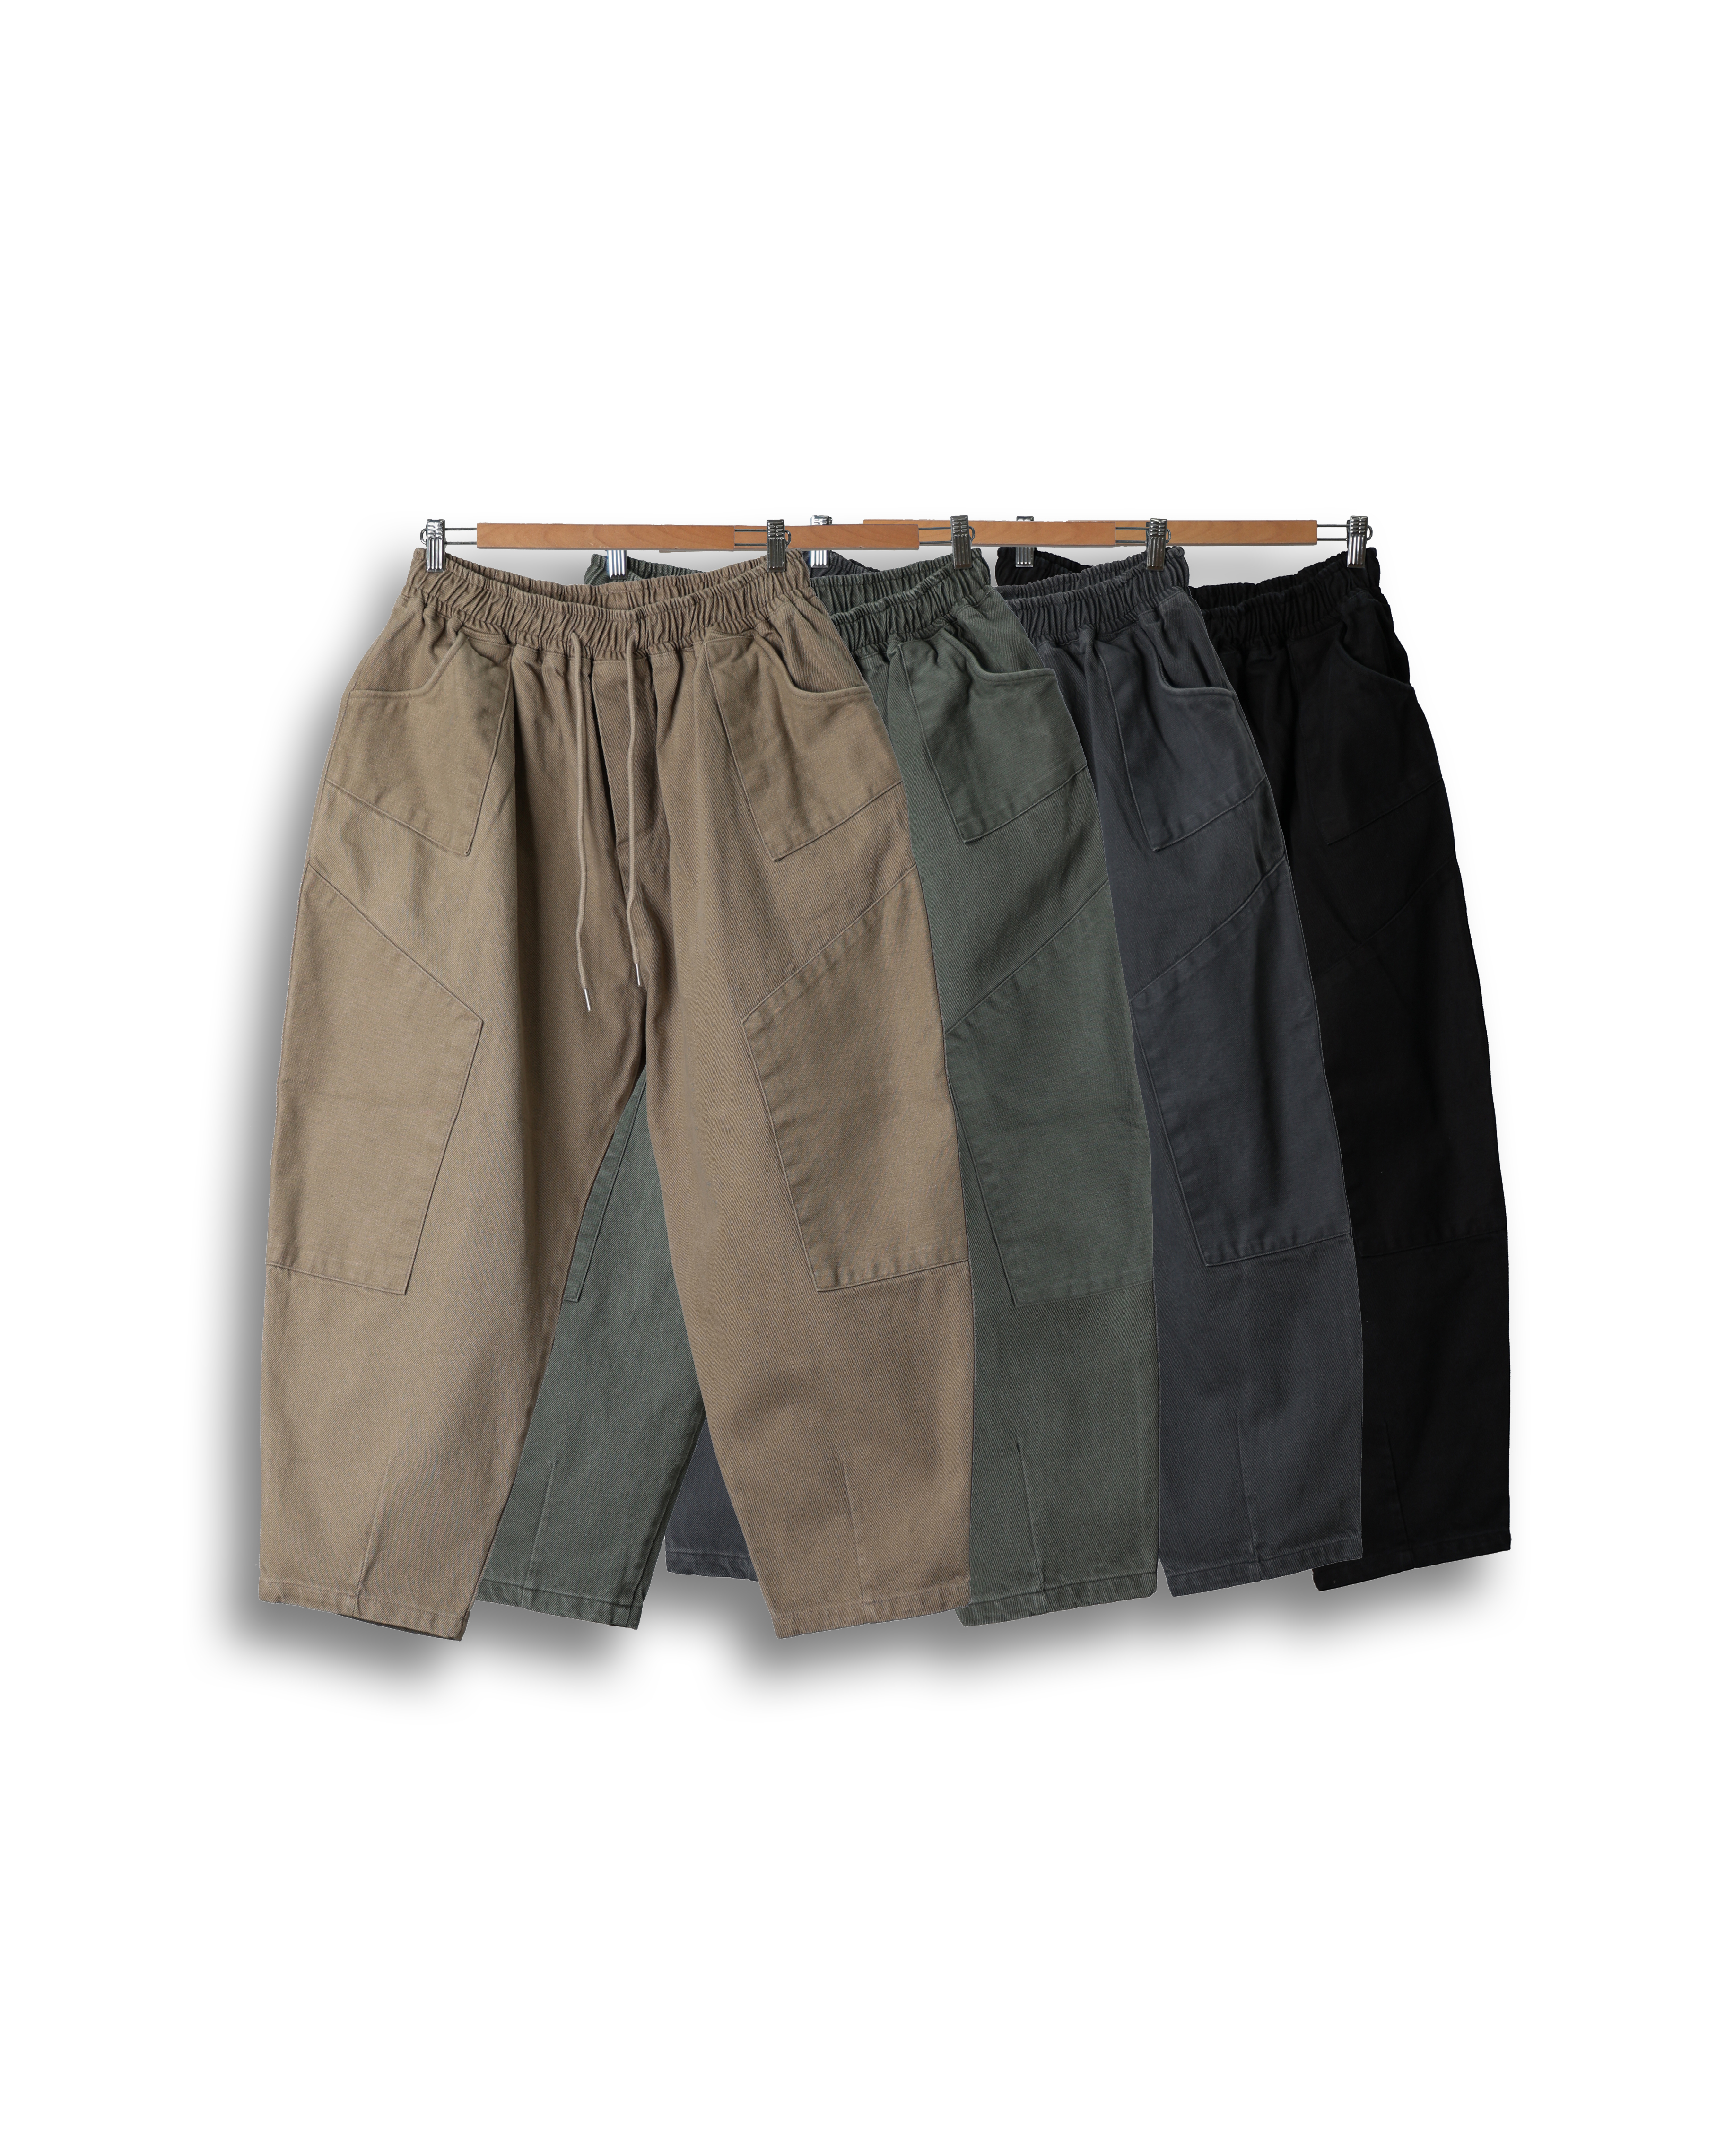 RAM ECHO Knee Double Patched Bulky Pants (Black/Charcoal/Olive/Beige)